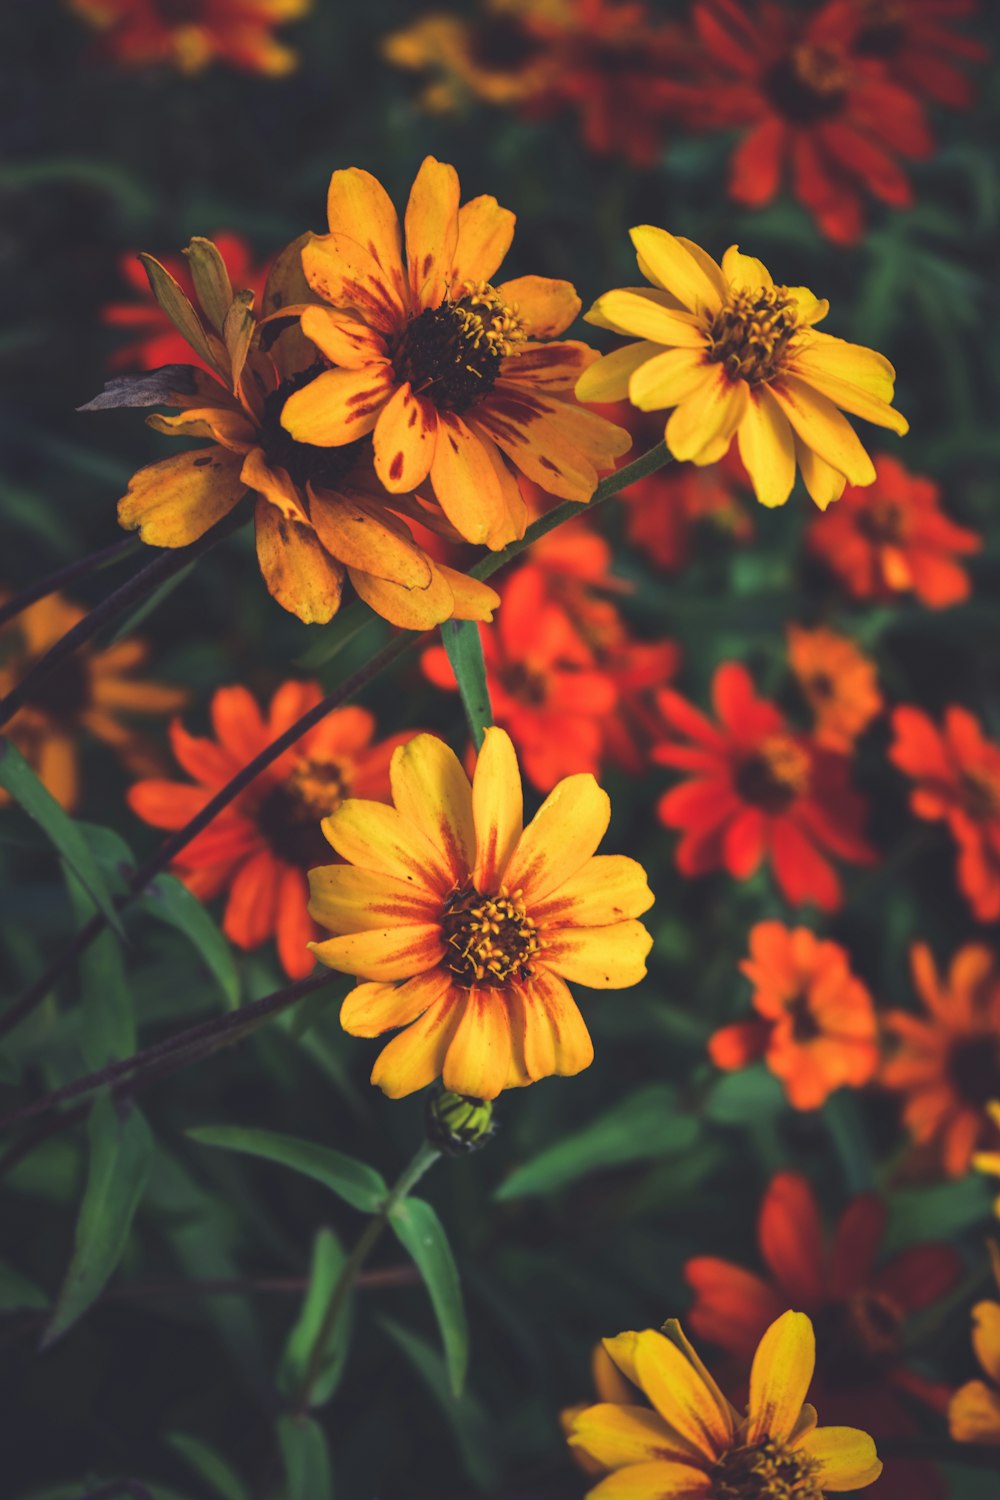 yellow and red flowers in bloom photo – Free Flower Image on Unsplash